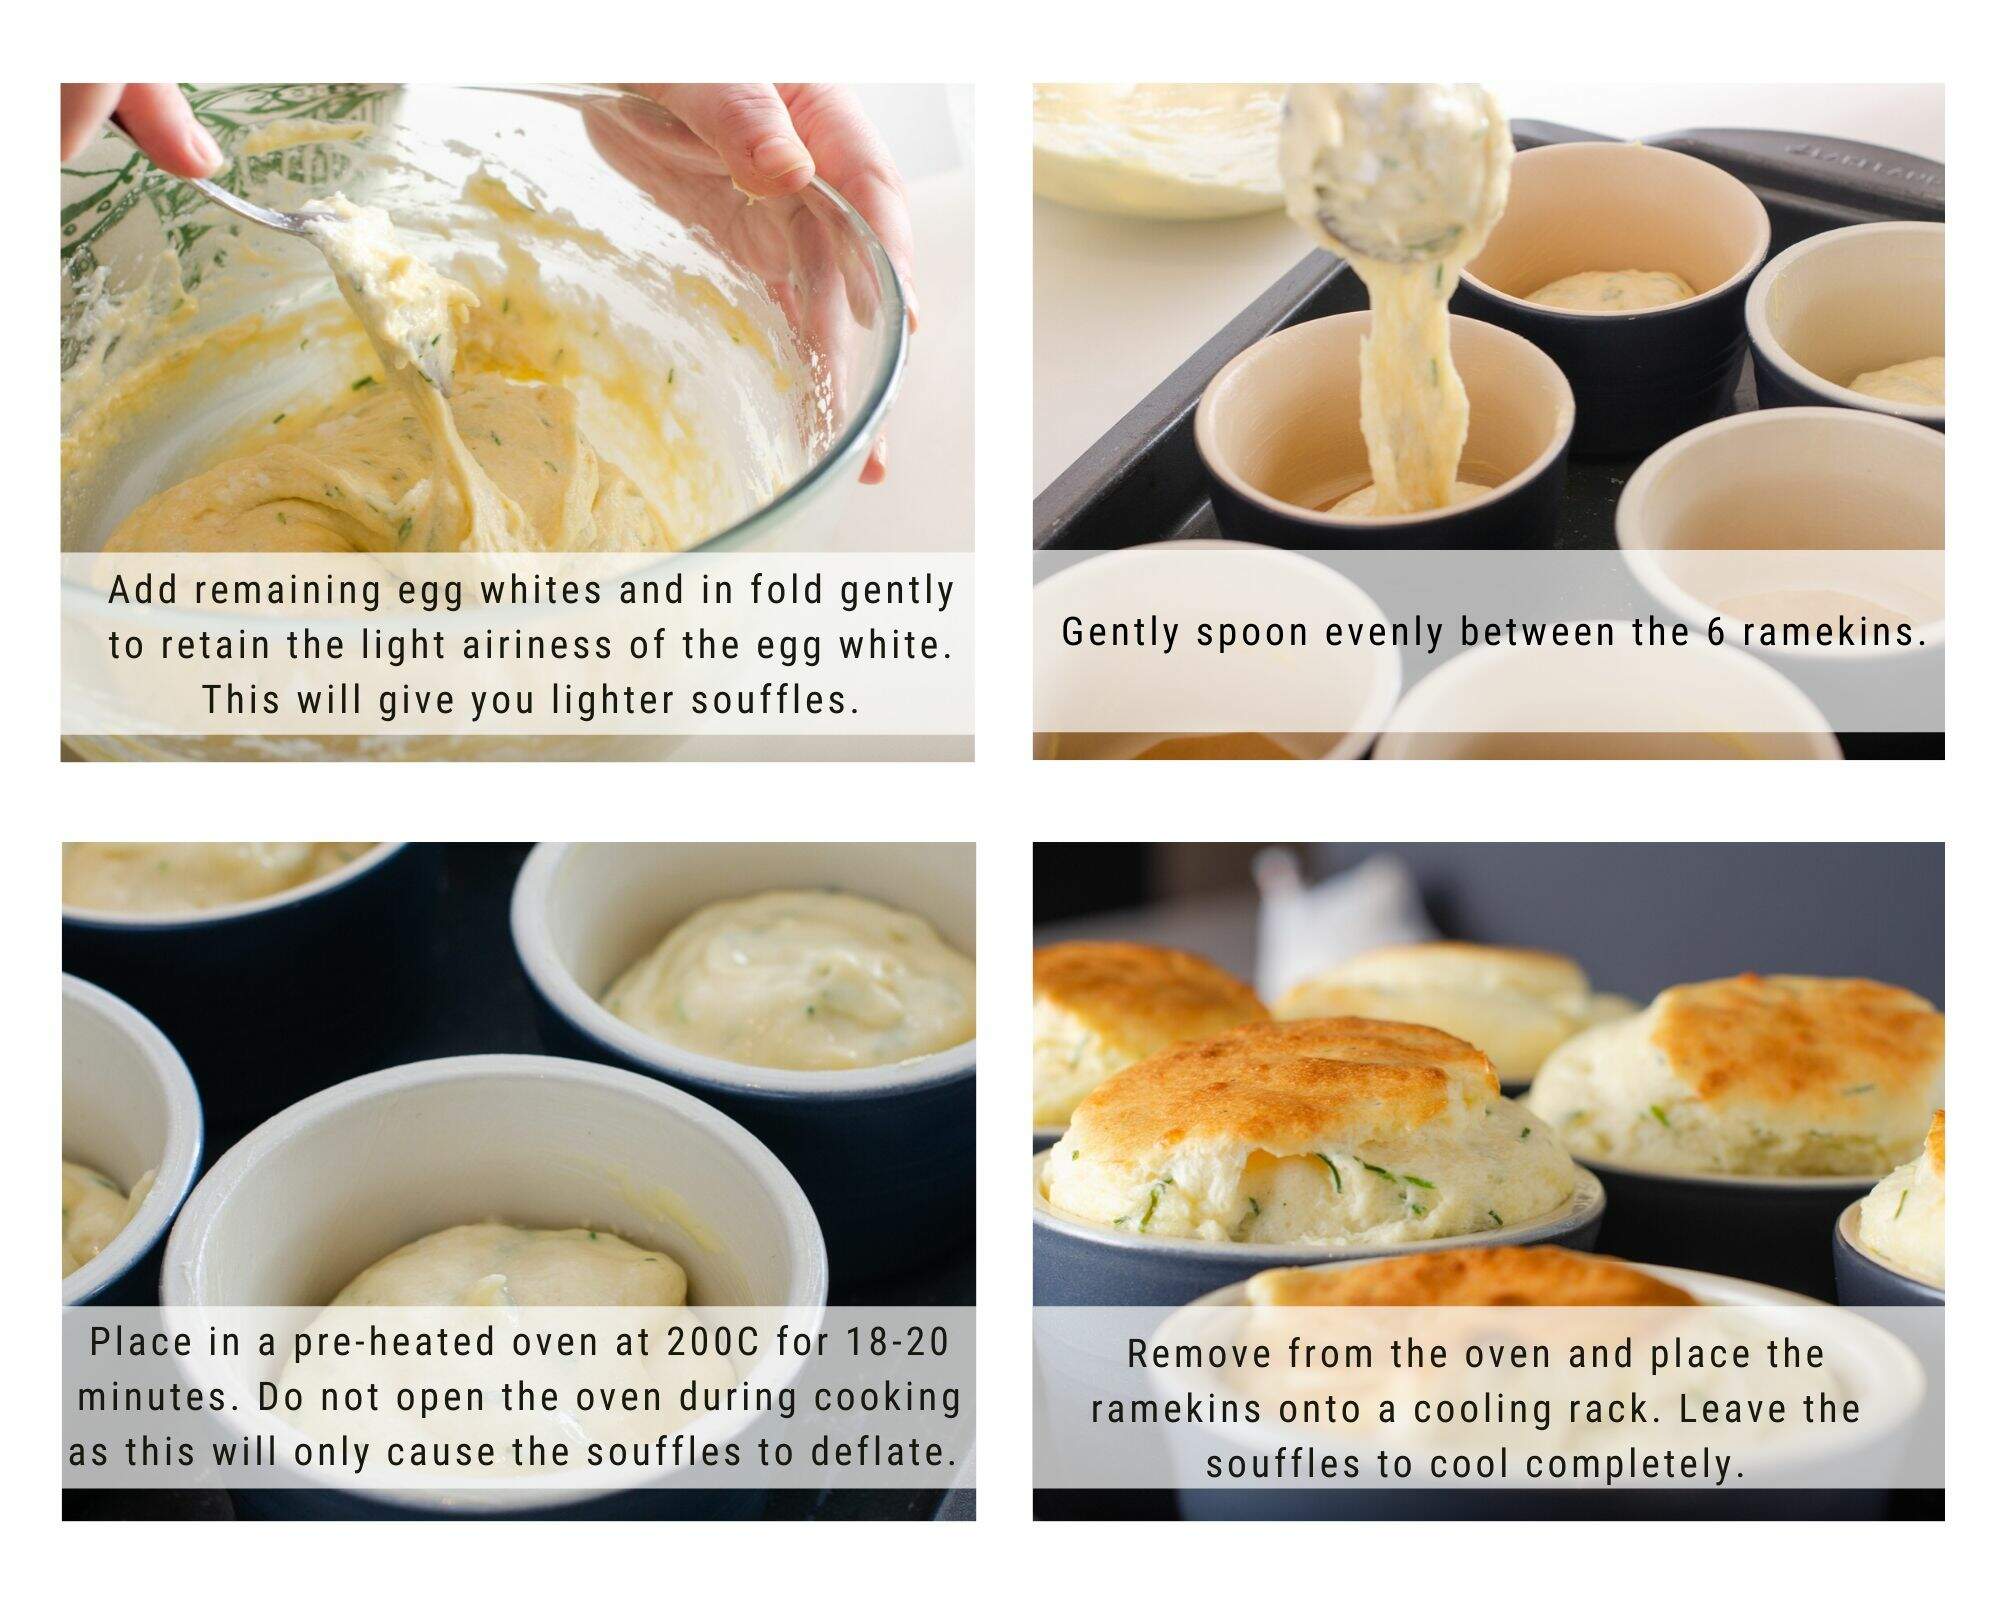 How to make twice baked cheese souffles step by step process by Lost in Food.